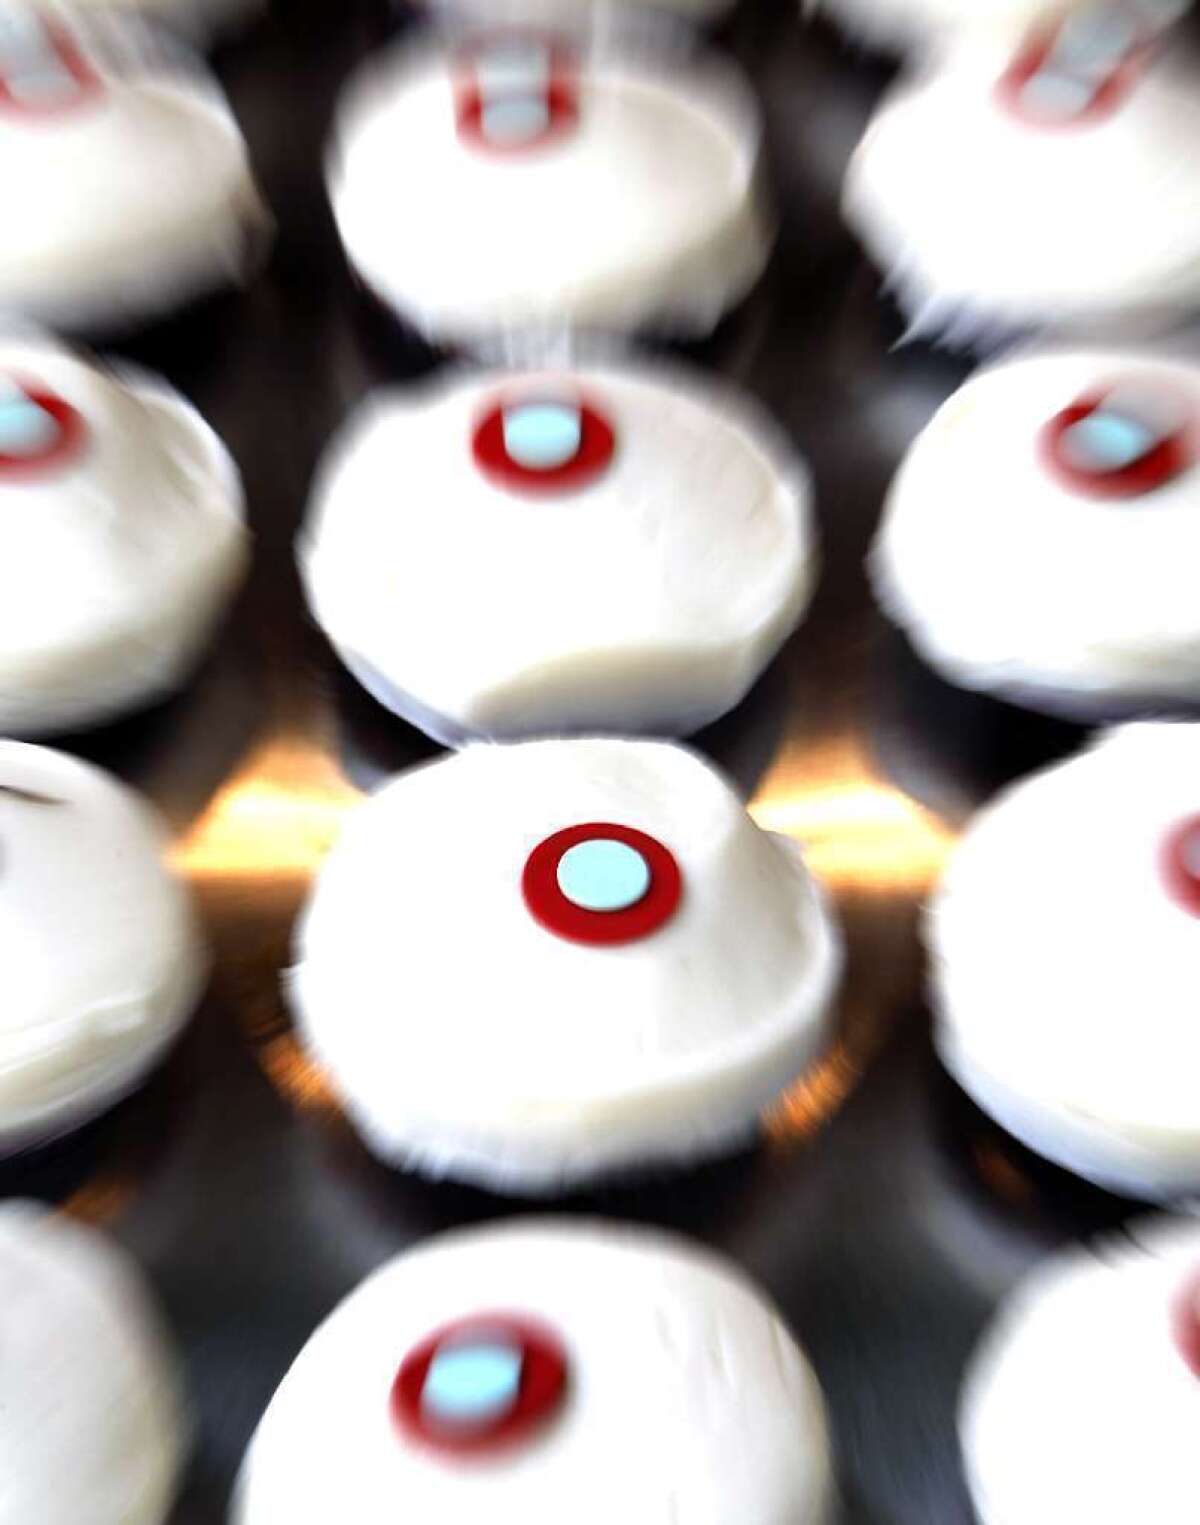 Sprinkles Cupcakes will open its 12th location at FIGat7th downtown.